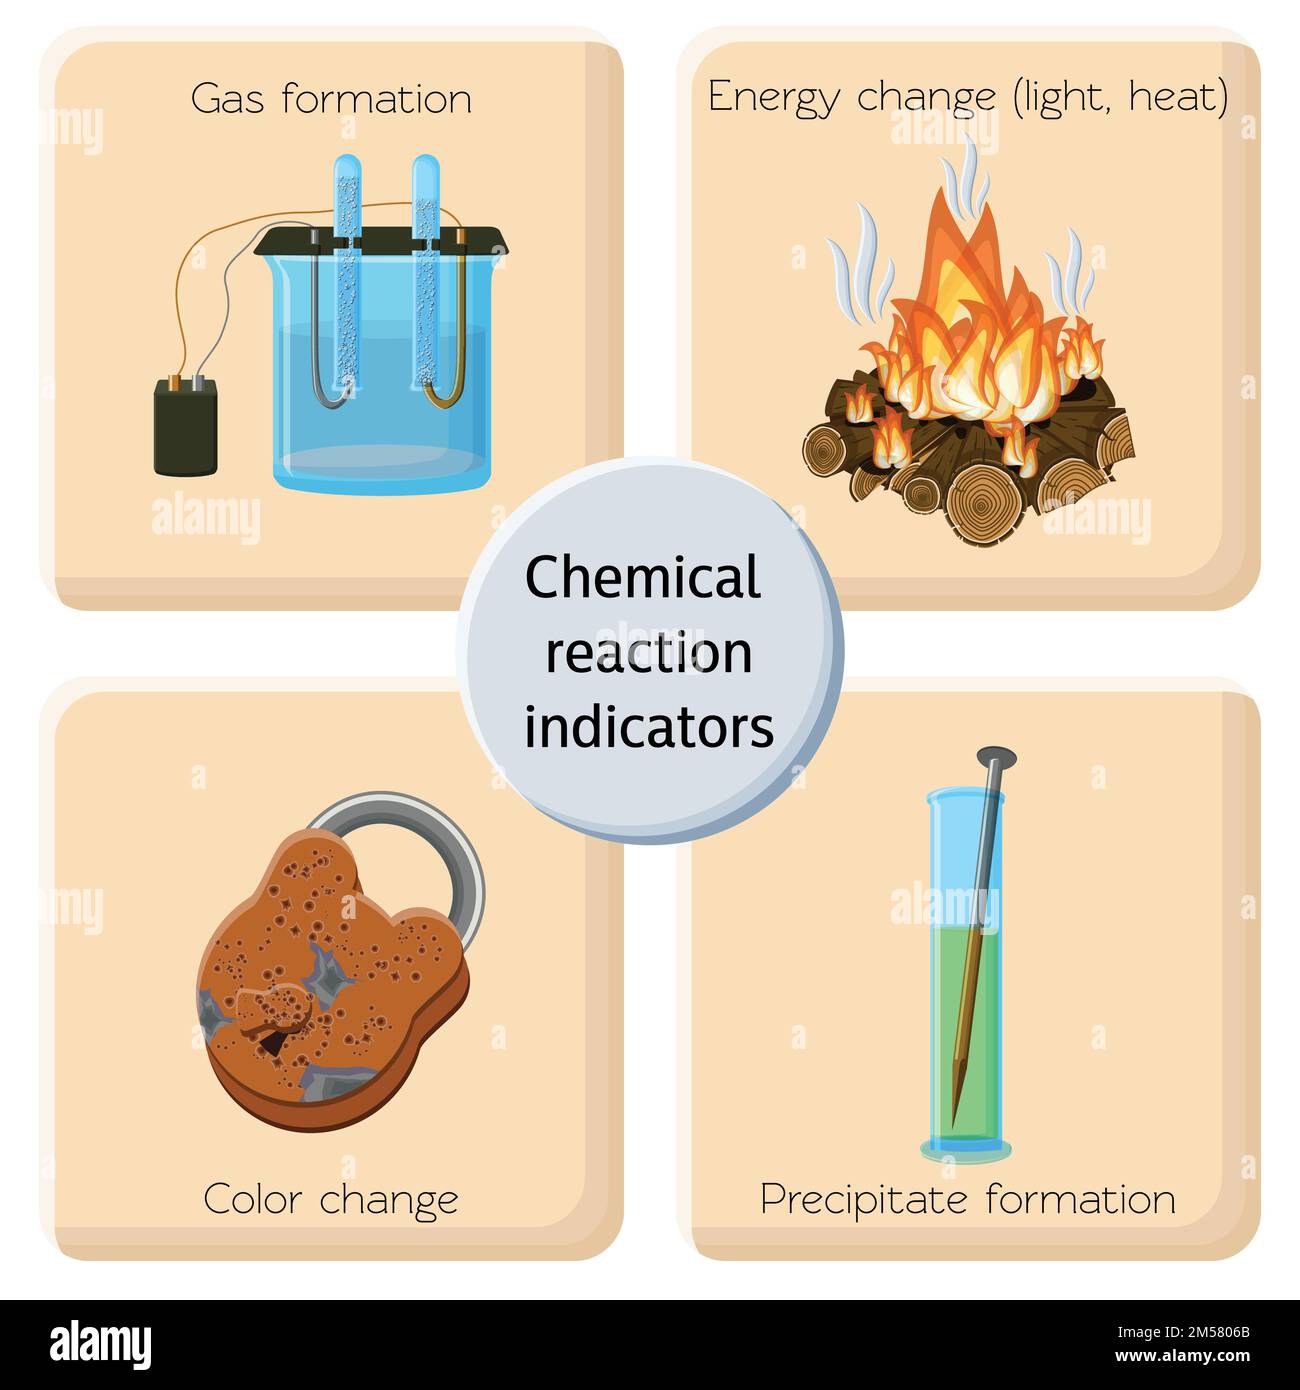 Chemical reaction indicators infographics. Chemical changes illustrating gas emission, light and heat release, color change and precipitation. Chemist Stock Vector